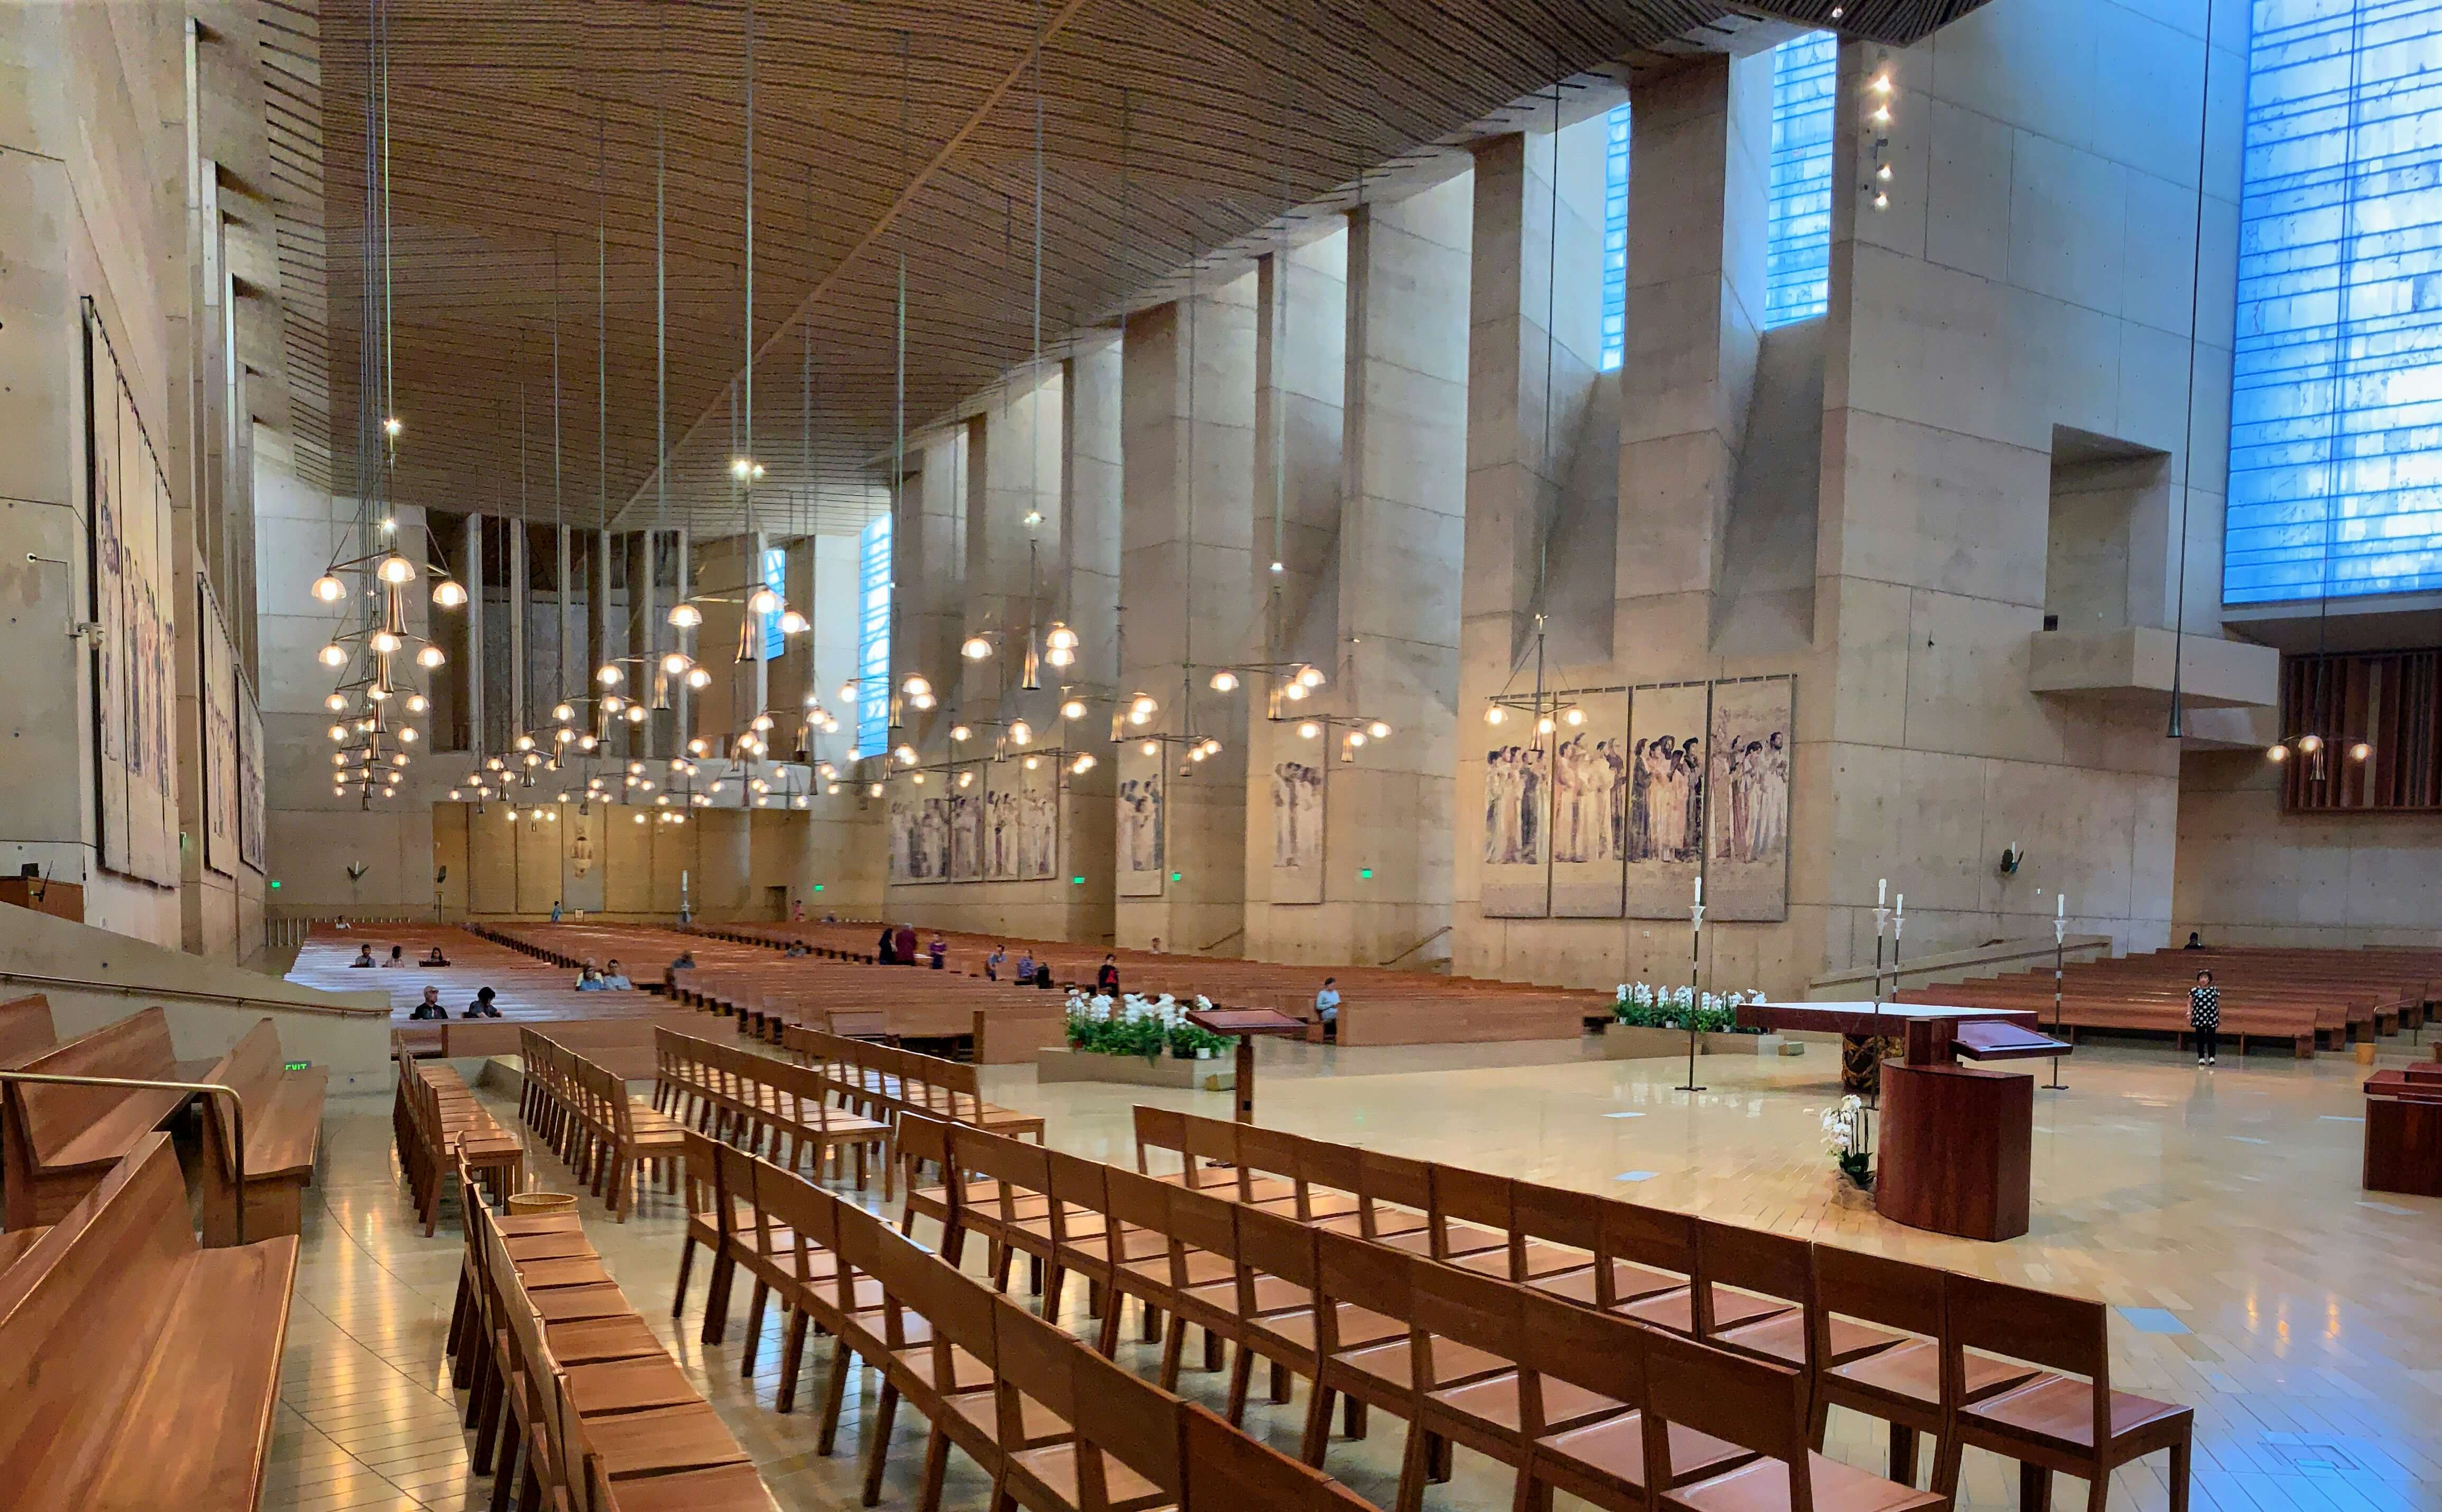 Cathedral of Our Lady of the Angels, Los Angeles, USA